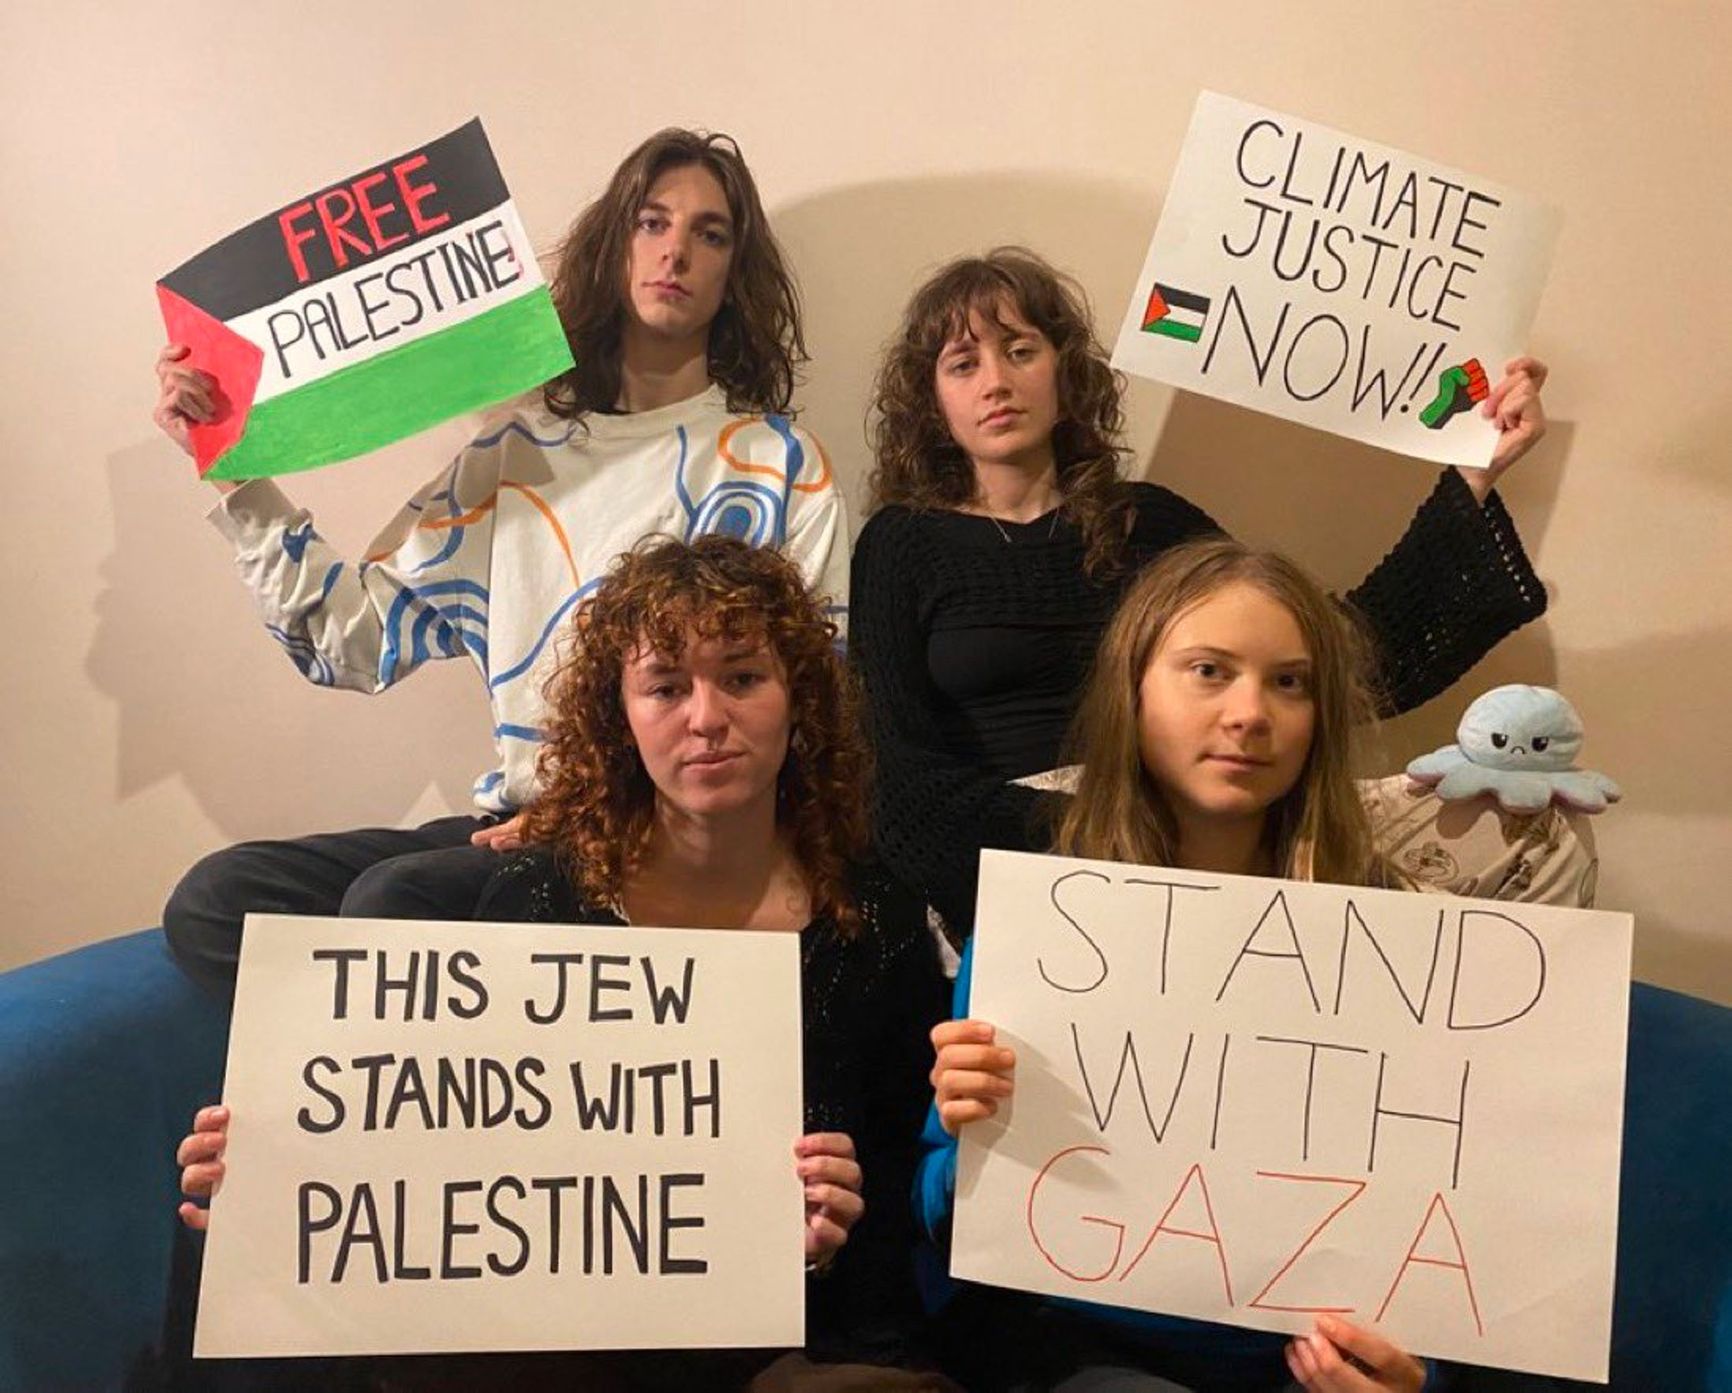 Greta Thunberg deleted the photo with the blue octopus, which she posted on social media in support of Palestine